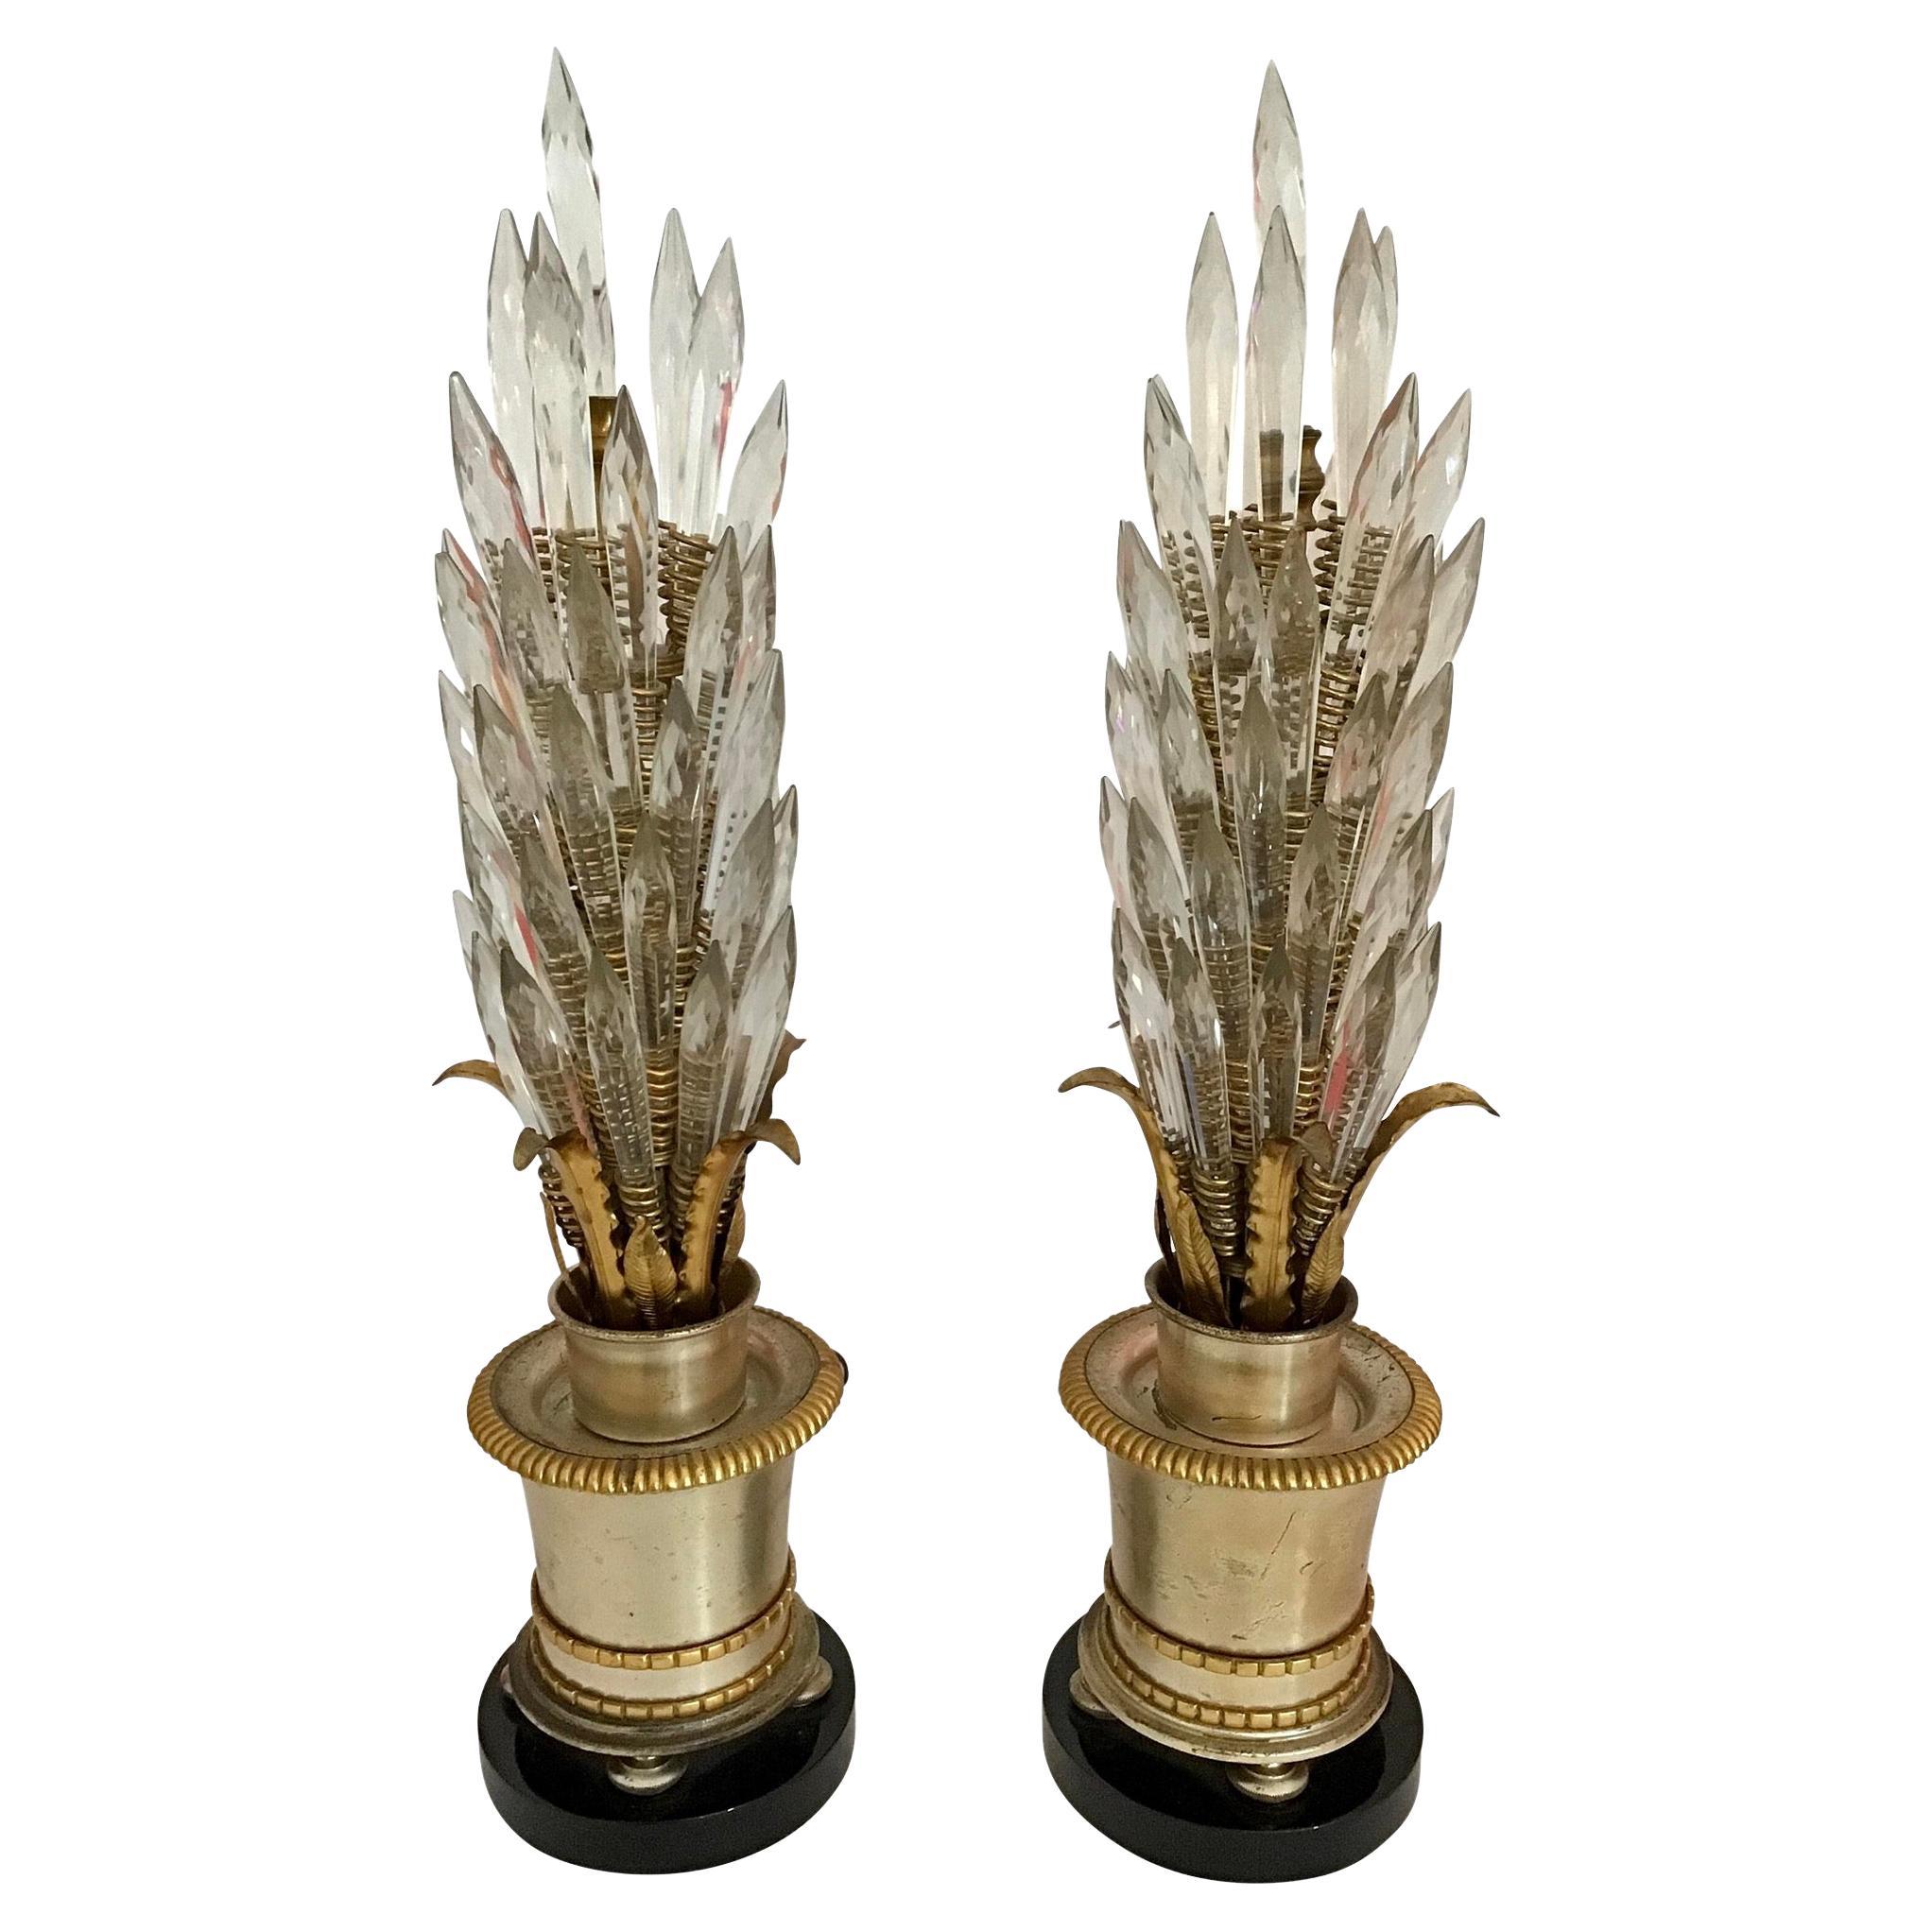 Jansen Crystal and Metal Gilt Table Lamps, a Pair